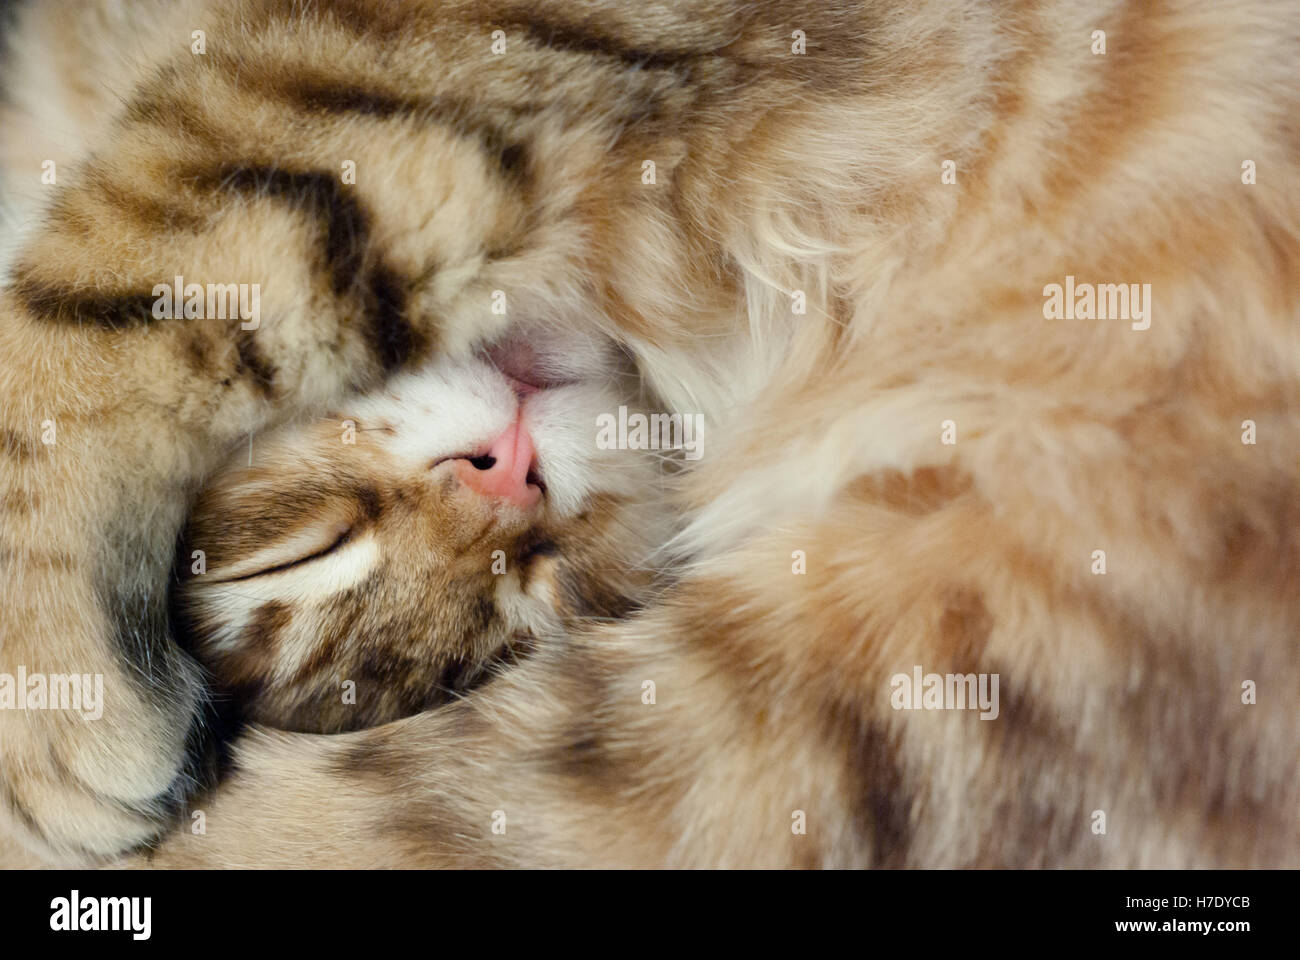 Siberian tabby kitten sleeping with a paw over his head, relaxed, close-up. Stock Photo